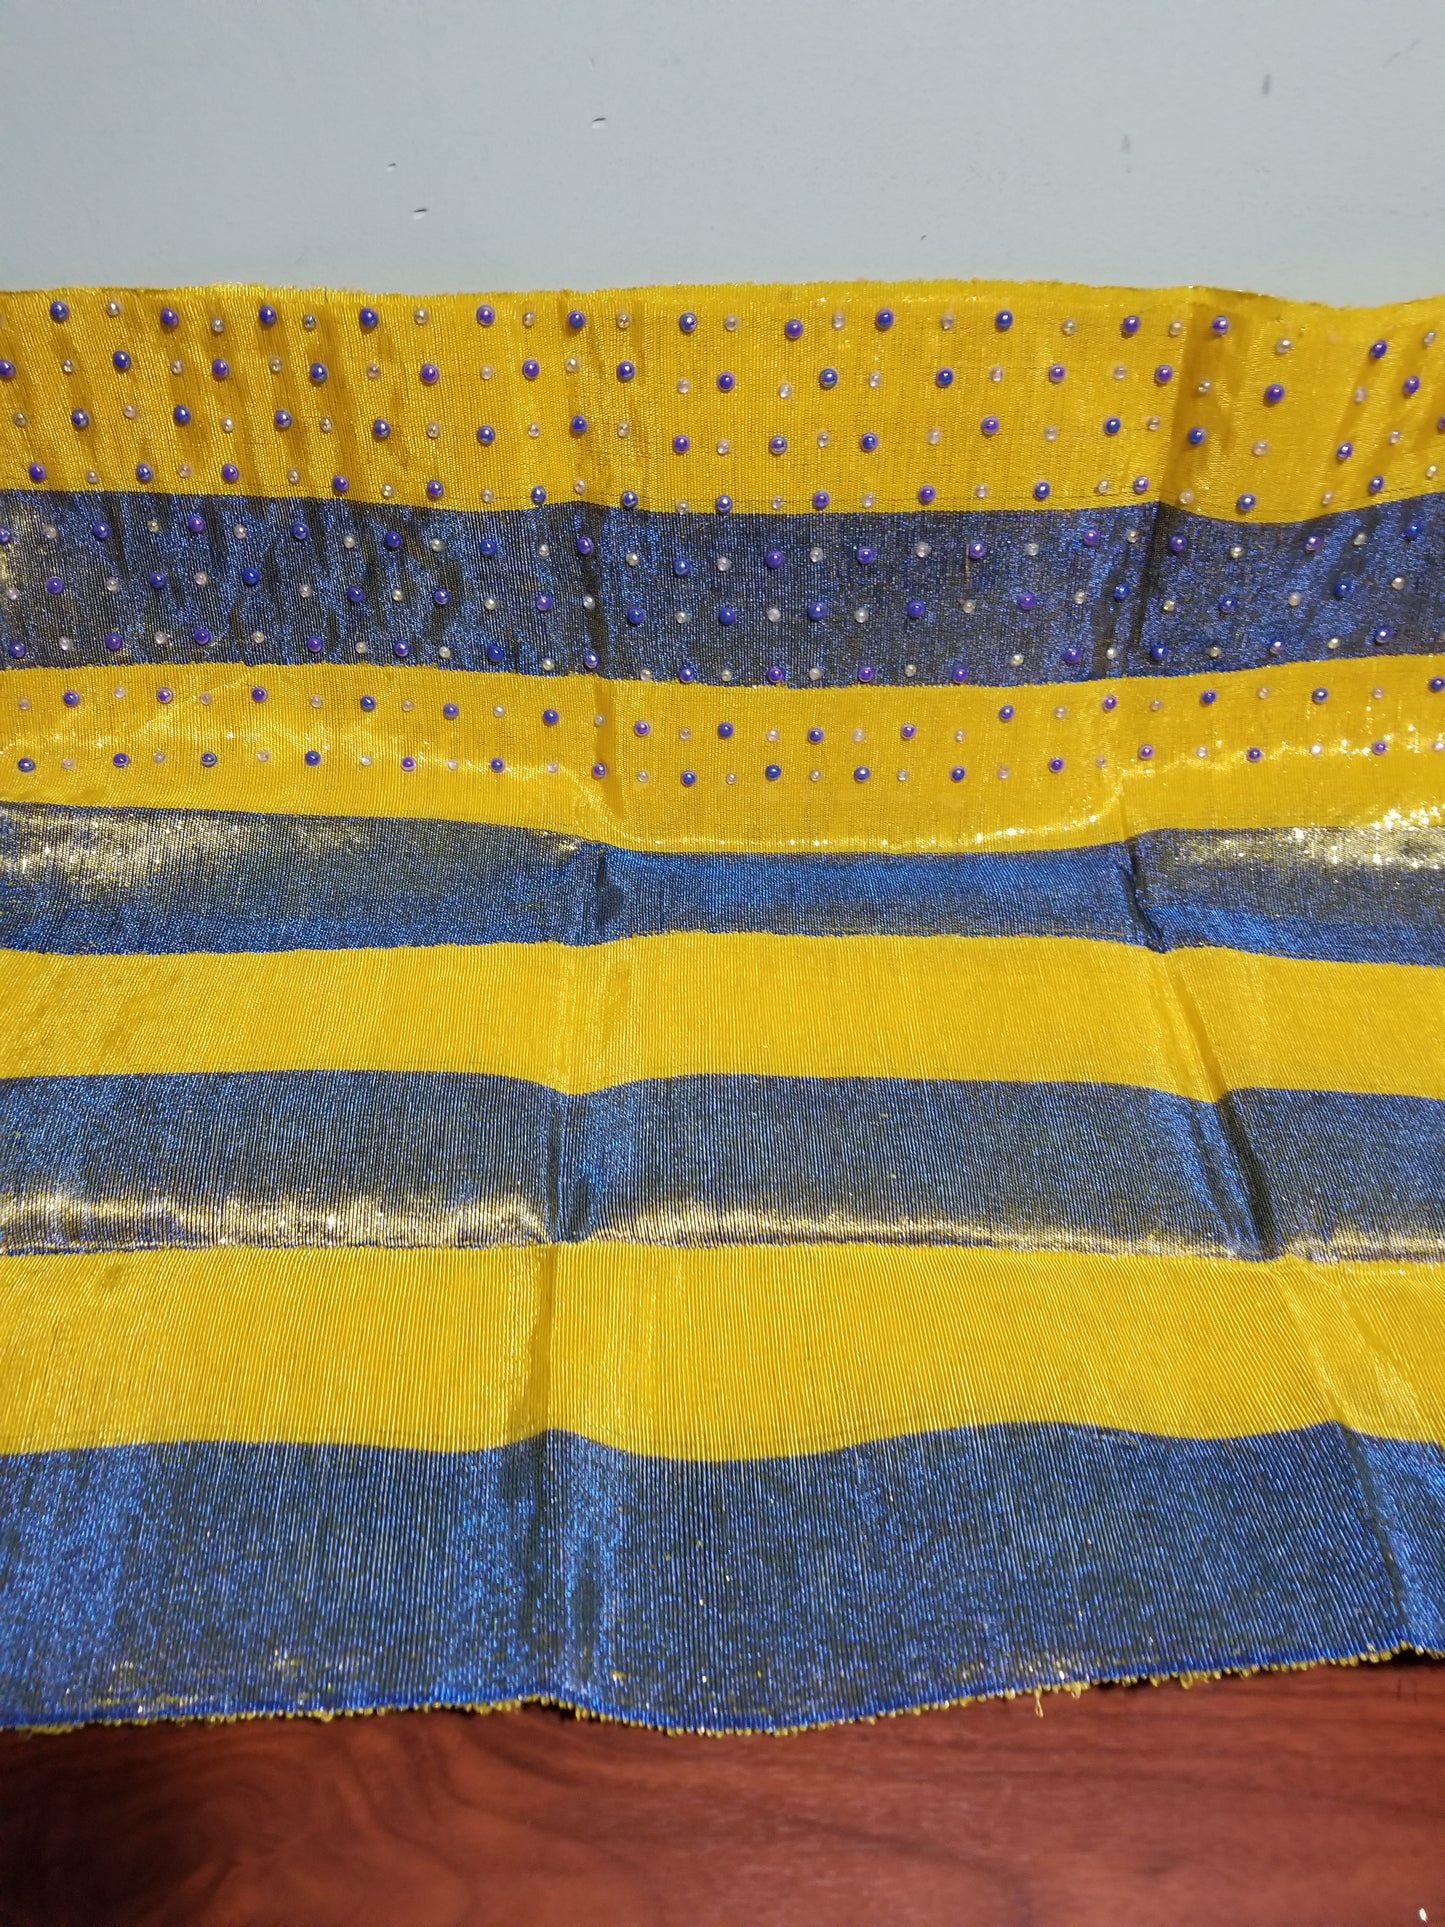 Clearance sale: metalice Yellow/royalblue aso-oke gele bedazzled border with pearls. Extra large width for making big gele. Nigerian Traditional Aso-oke head wrap. Buy gele only or gele/fila for men cap. Made in Nigeria